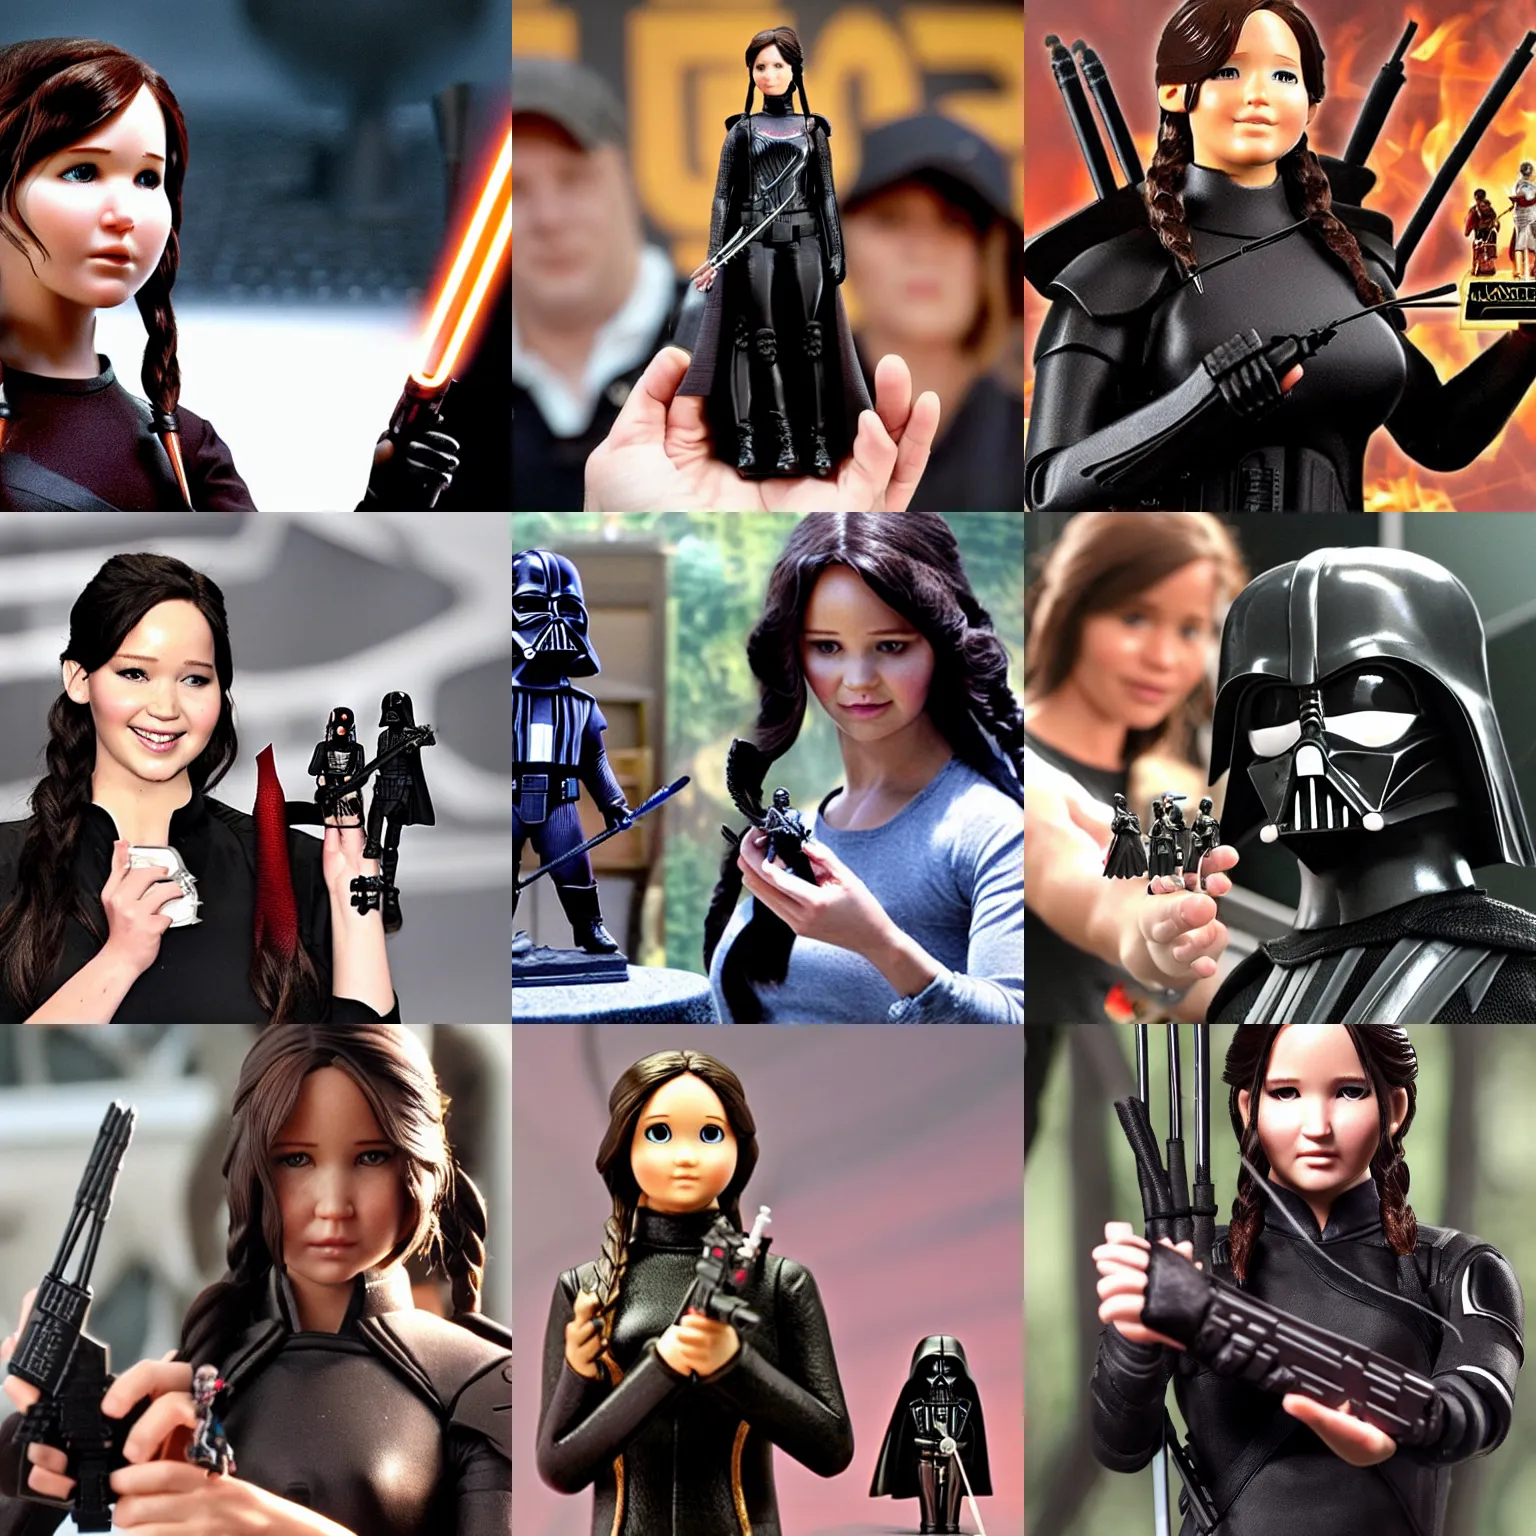 Prompt: Katniss Everdeen holding a miniature toy figure of Darth Vader